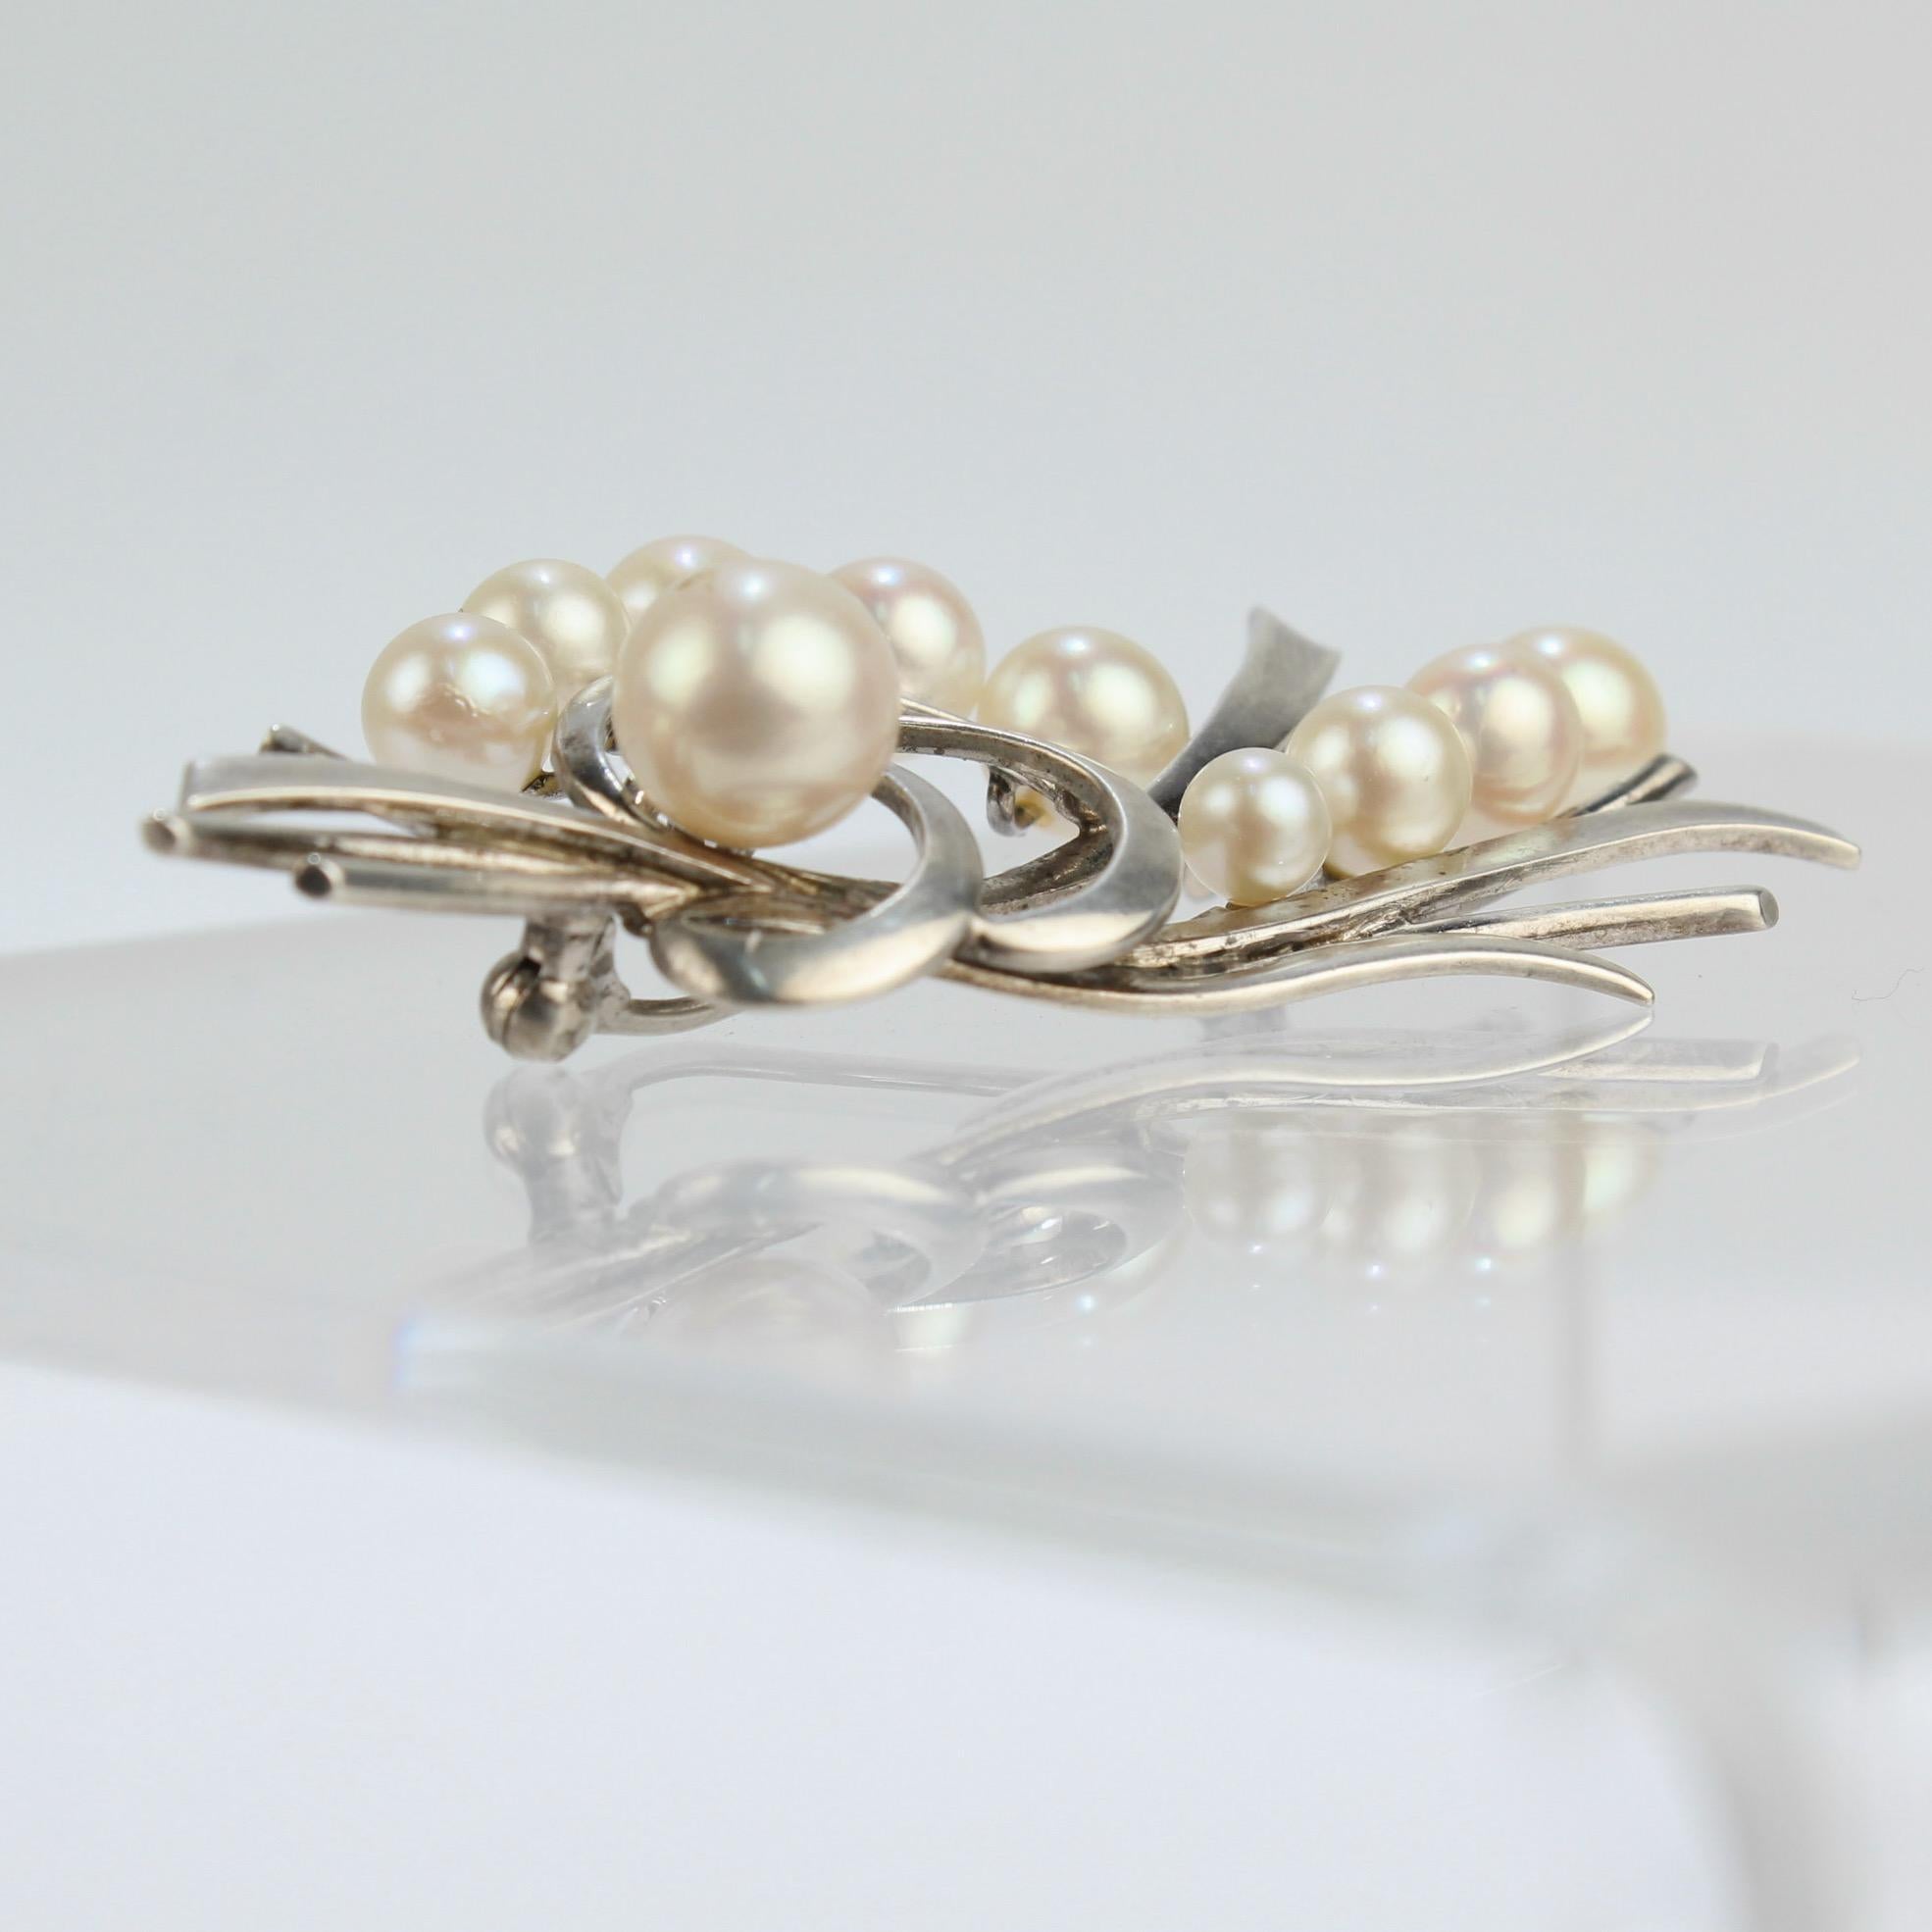 Vintage Mikimoto Akoya Cultured Pearl and Sterling Silver Brooch or Pin In Good Condition For Sale In Philadelphia, PA